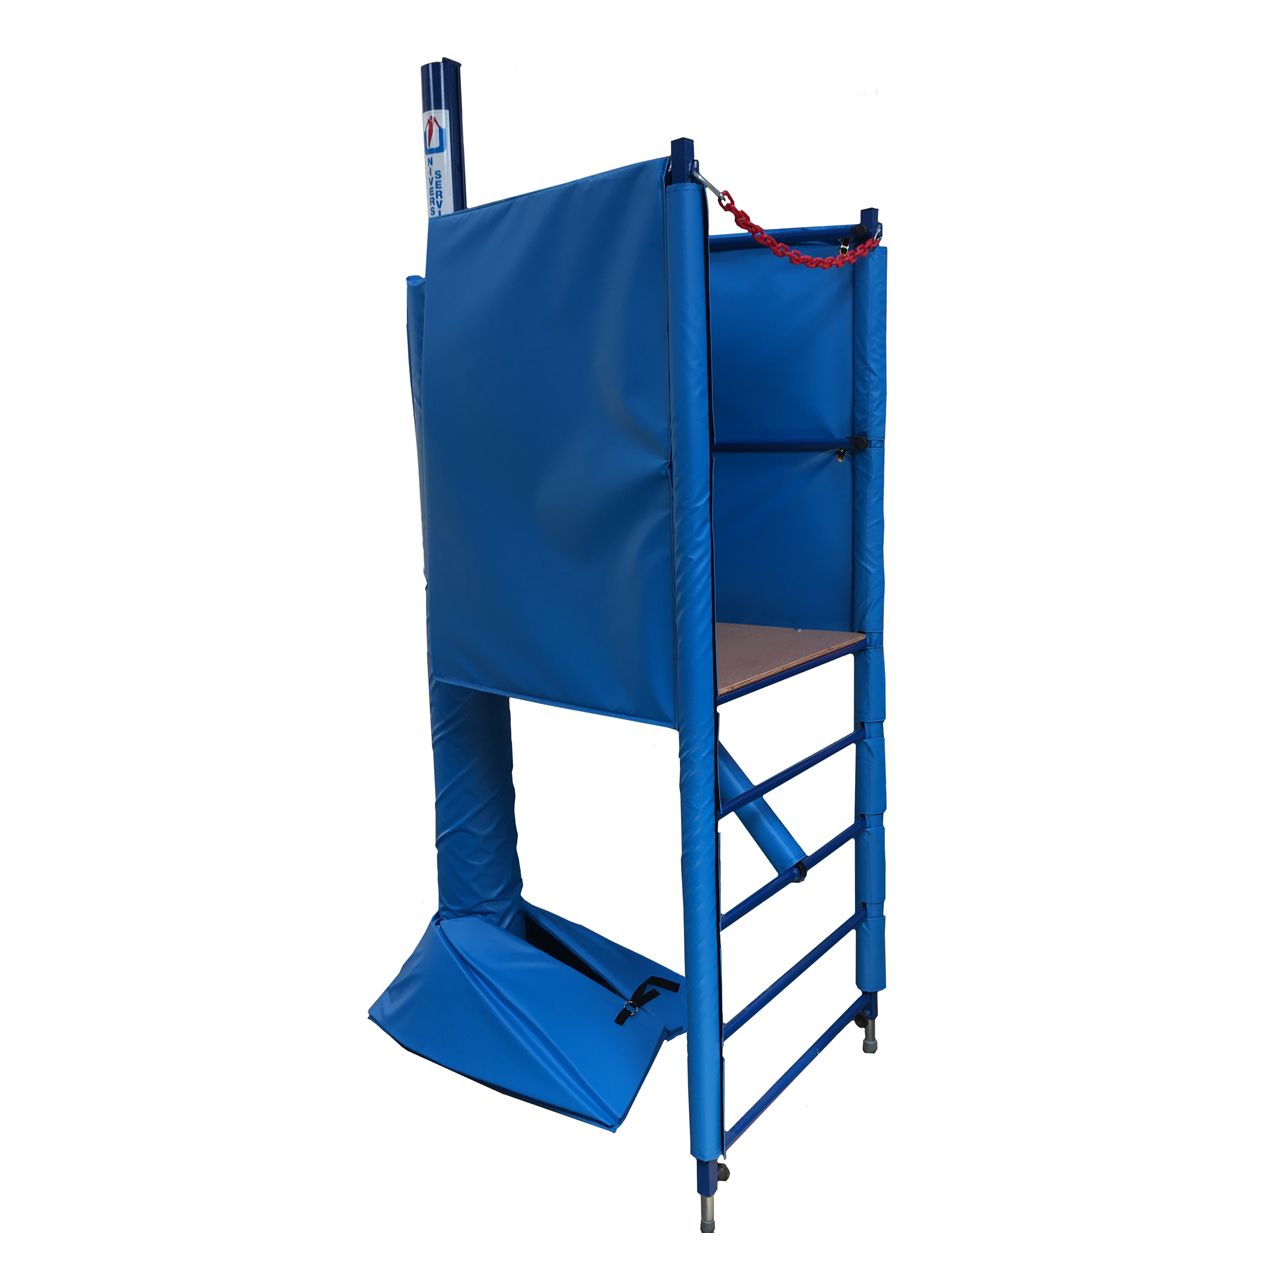 Universal Services Folding Volleyball Umpire Stand Padding